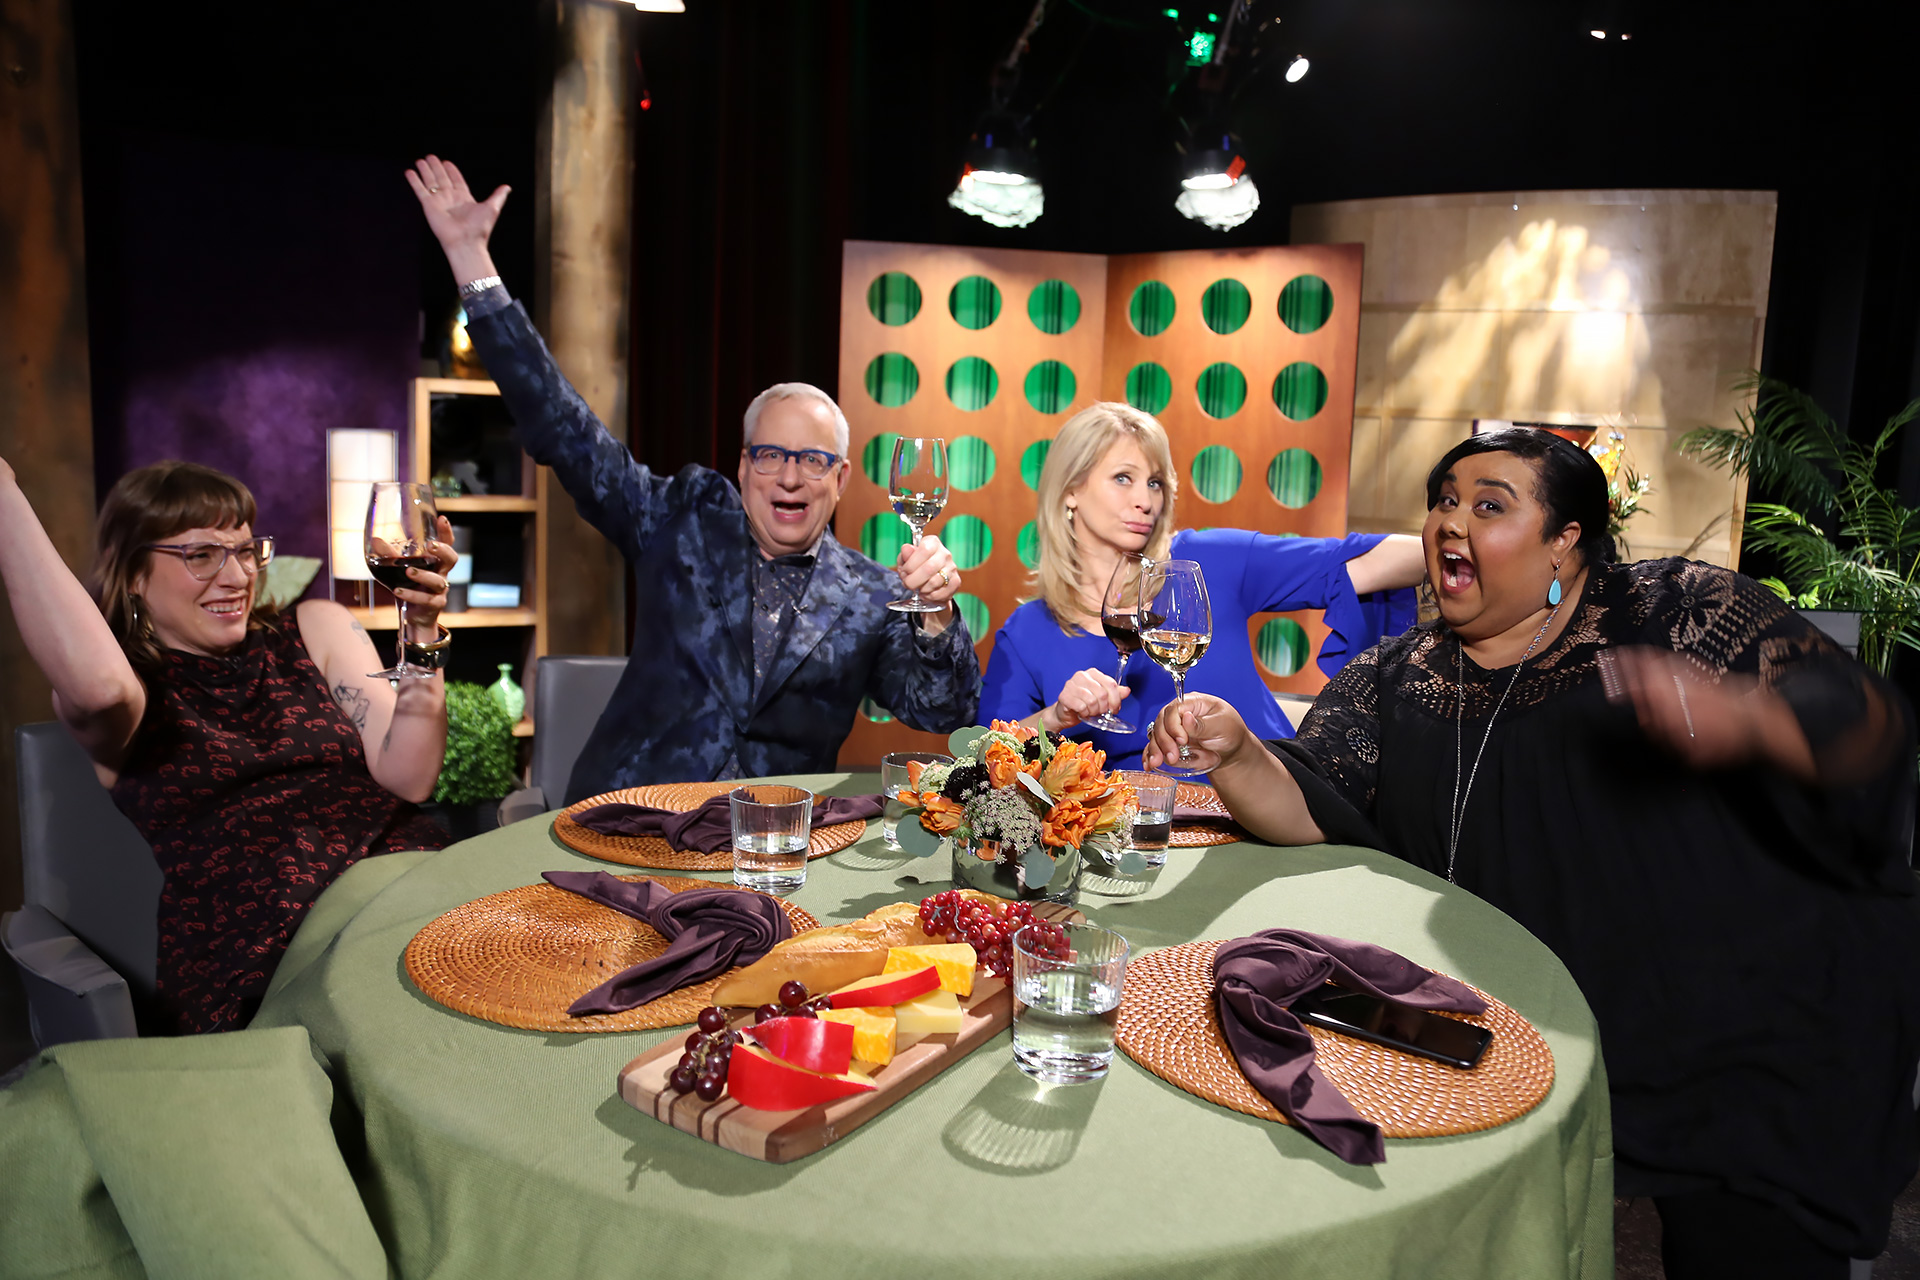 Host Leslie Sbrocco and guests having fun on the set of season 13 episode 6.